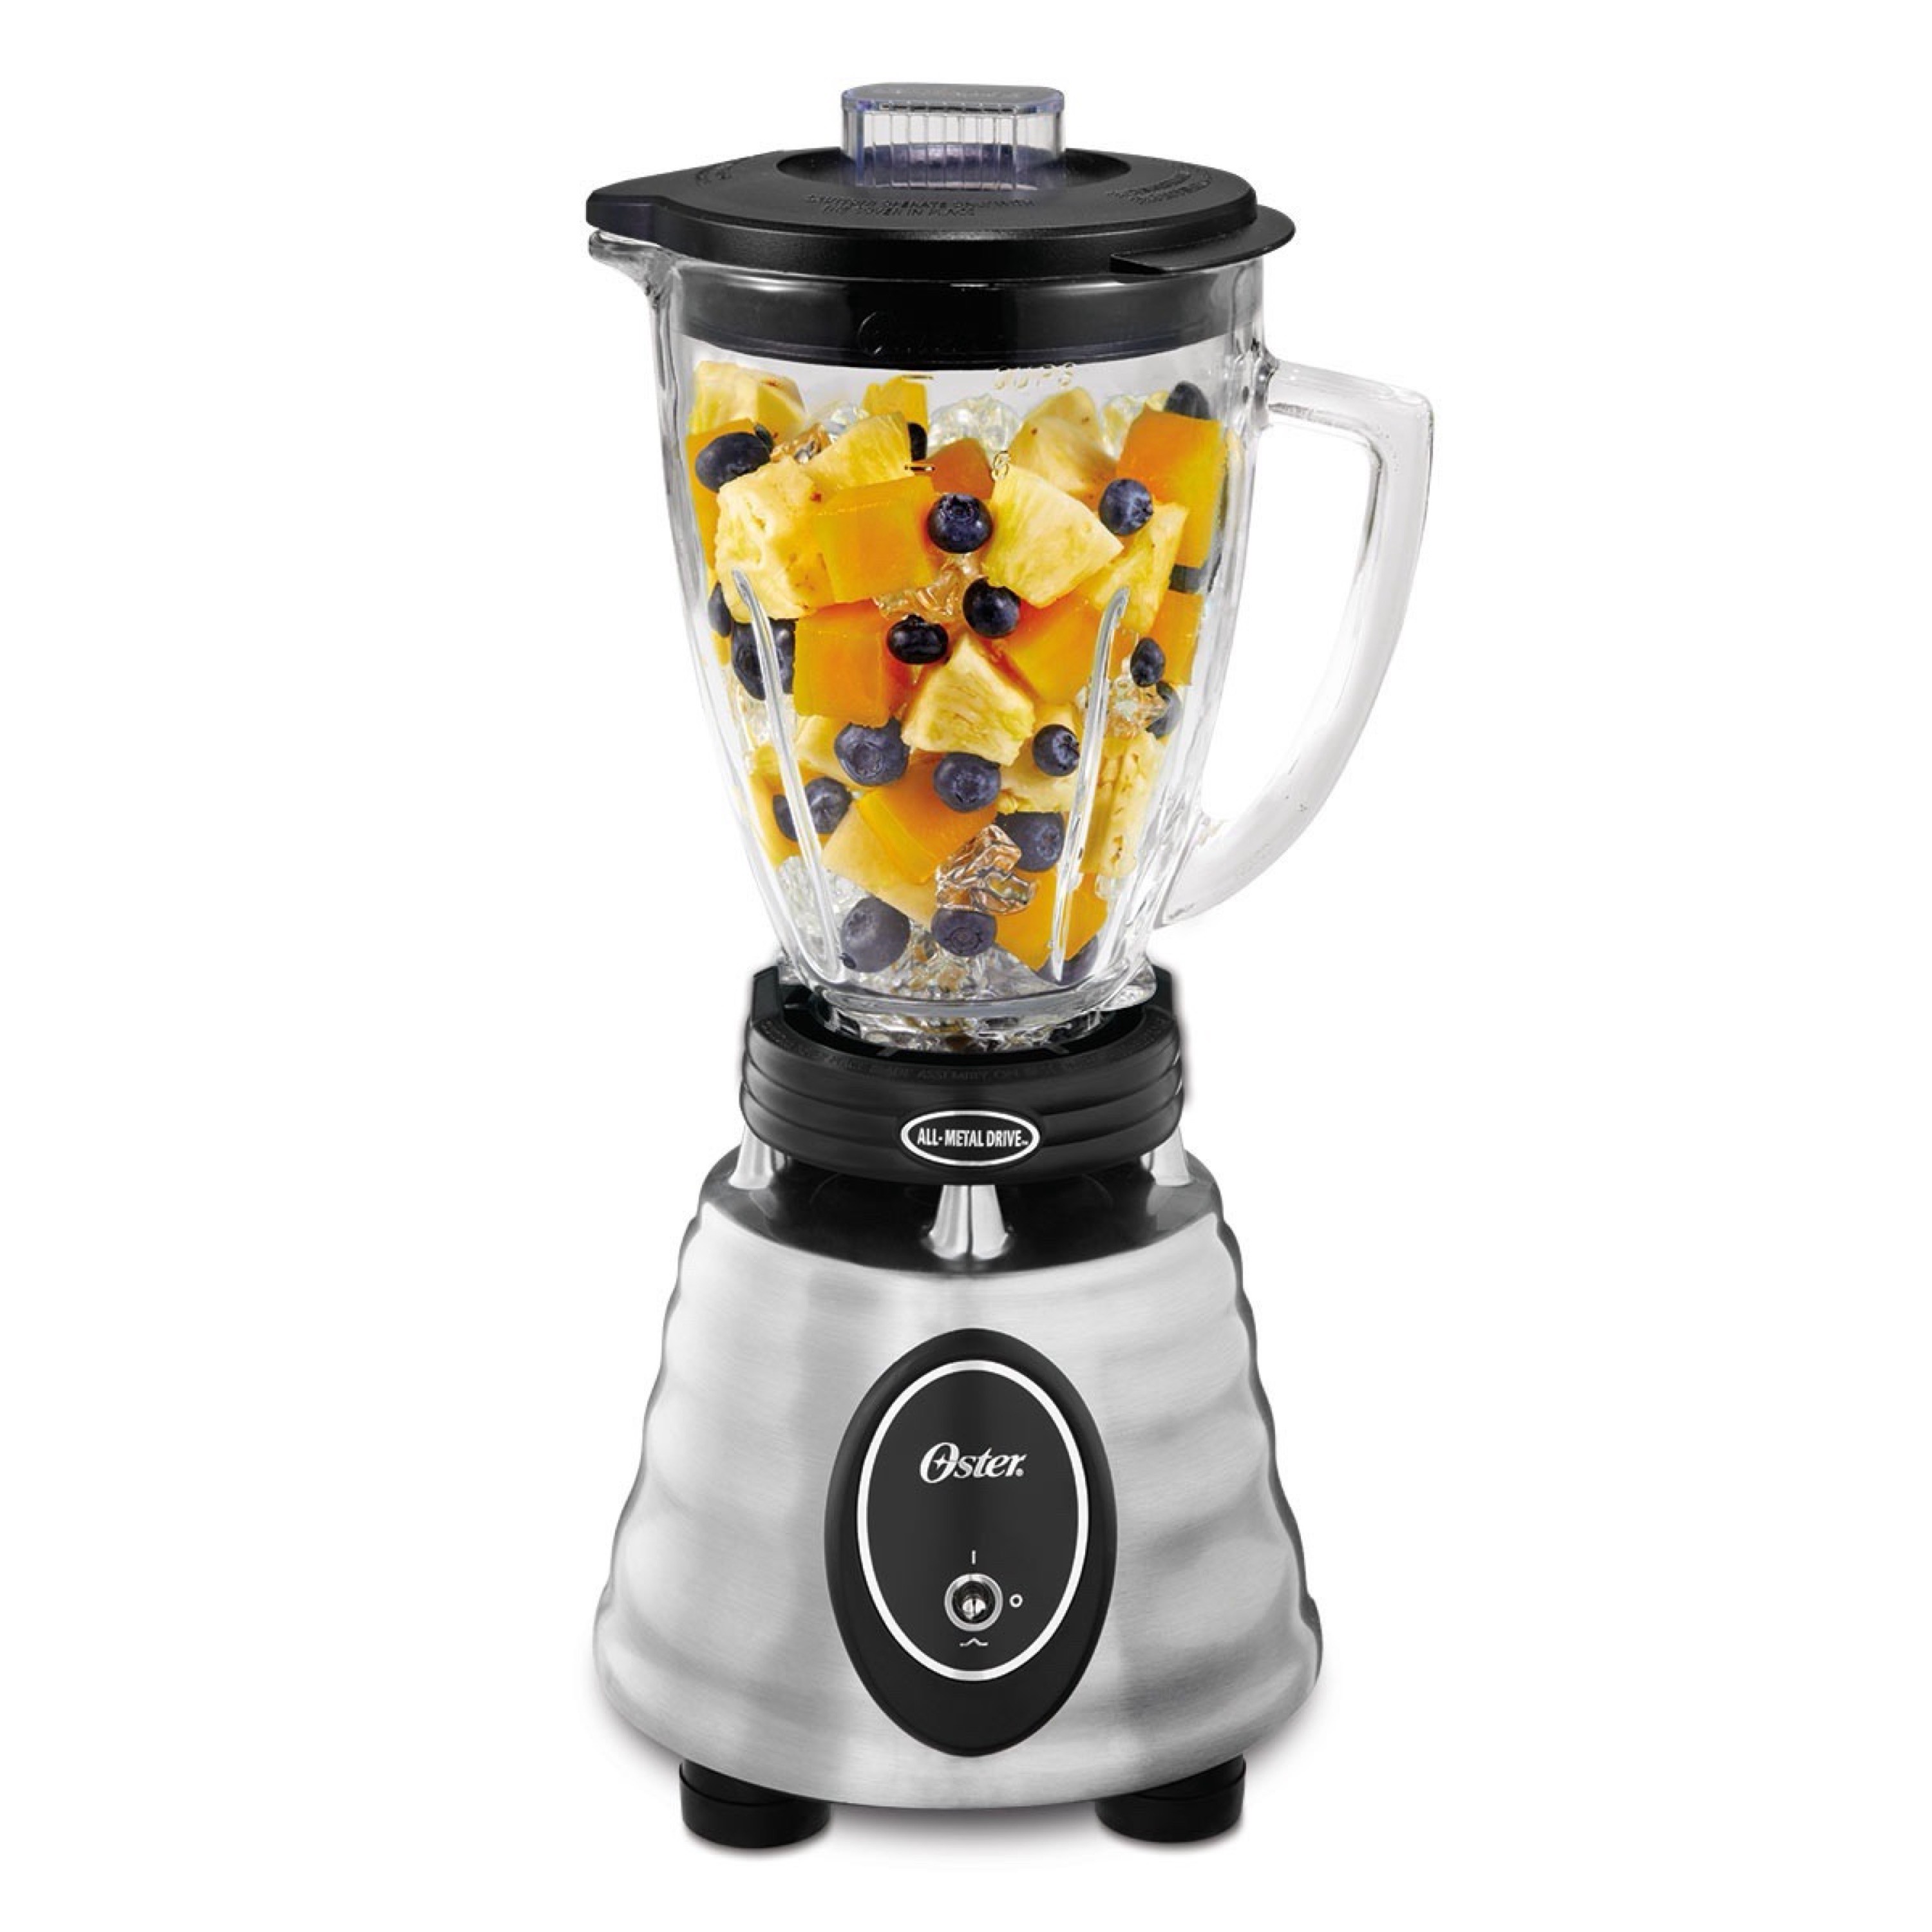 Oster® Classic Series Heritage Blender with 6-Cup Glass Jar, Stainless Steel - image 4 of 4